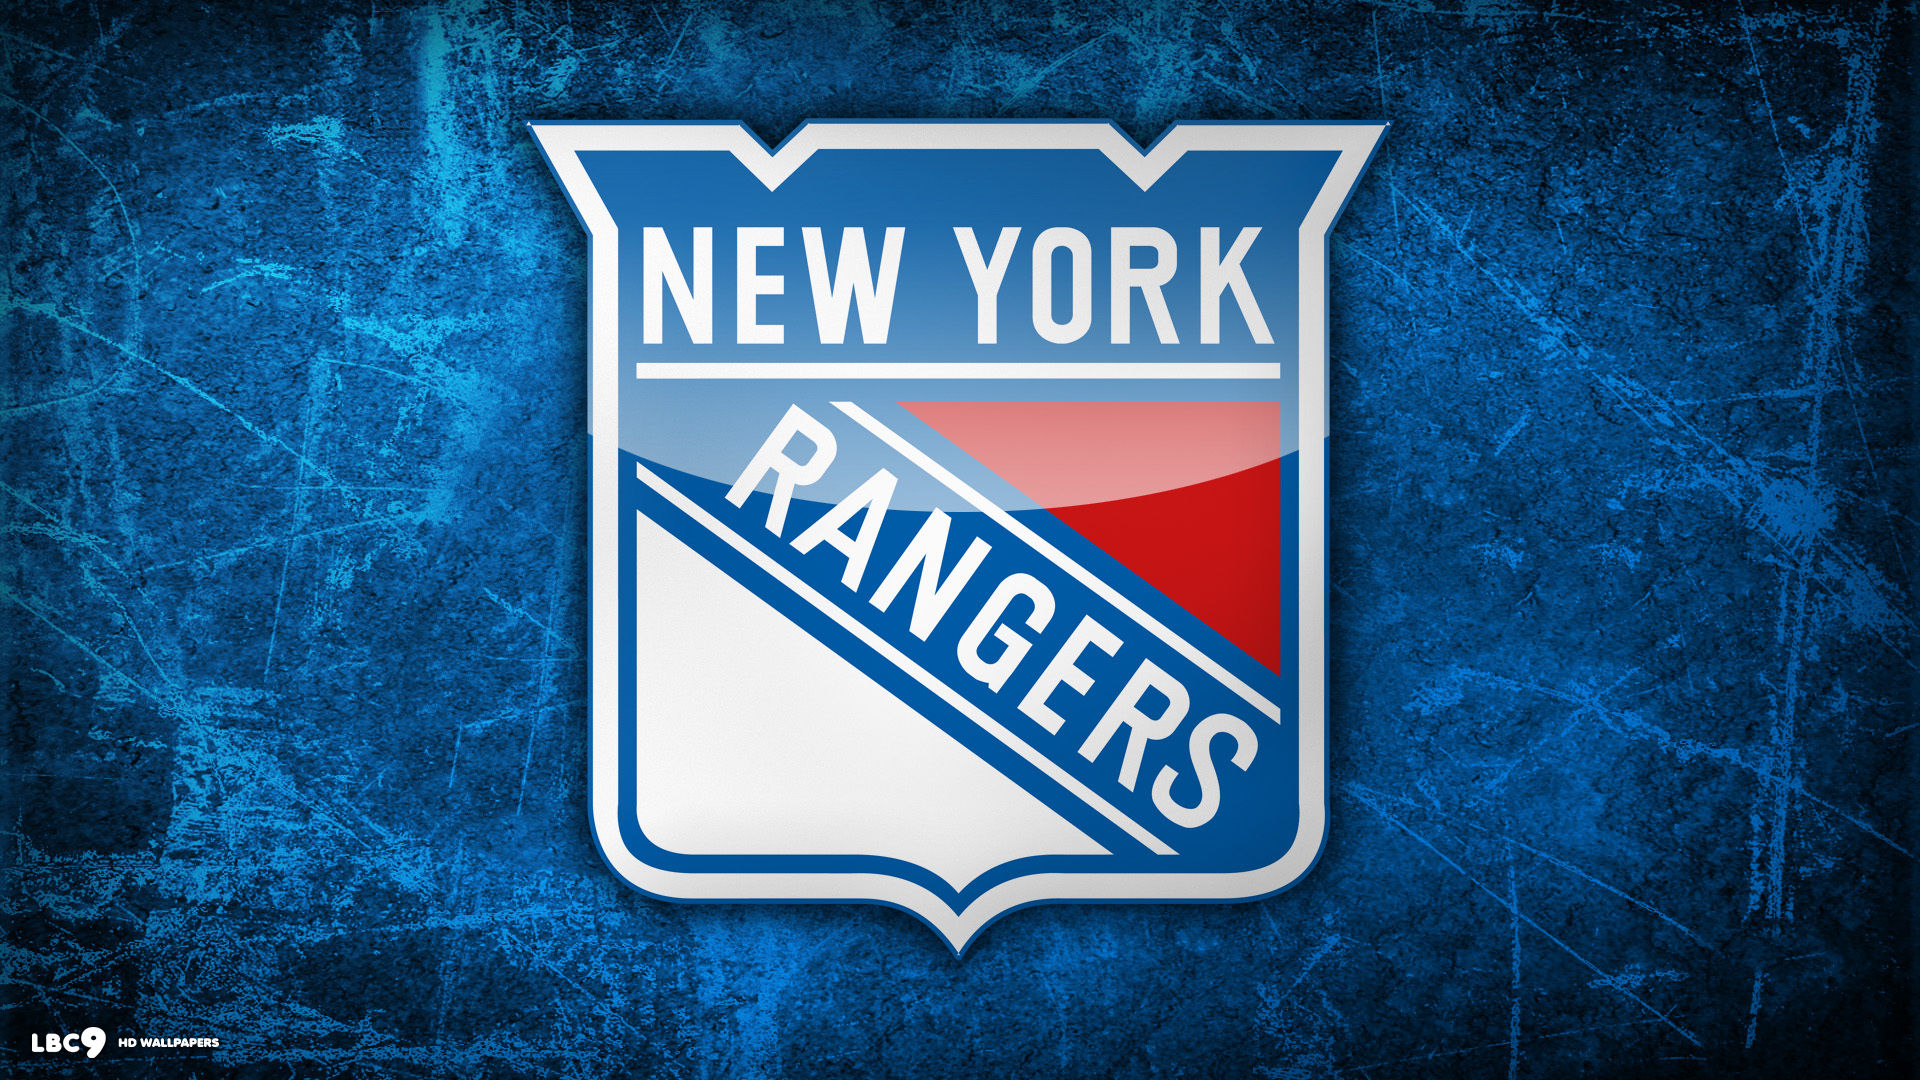 Bringing wallpapers everyday so you can enjoy them all! :DToday, a New York Rangers background..what more could you ask? :D